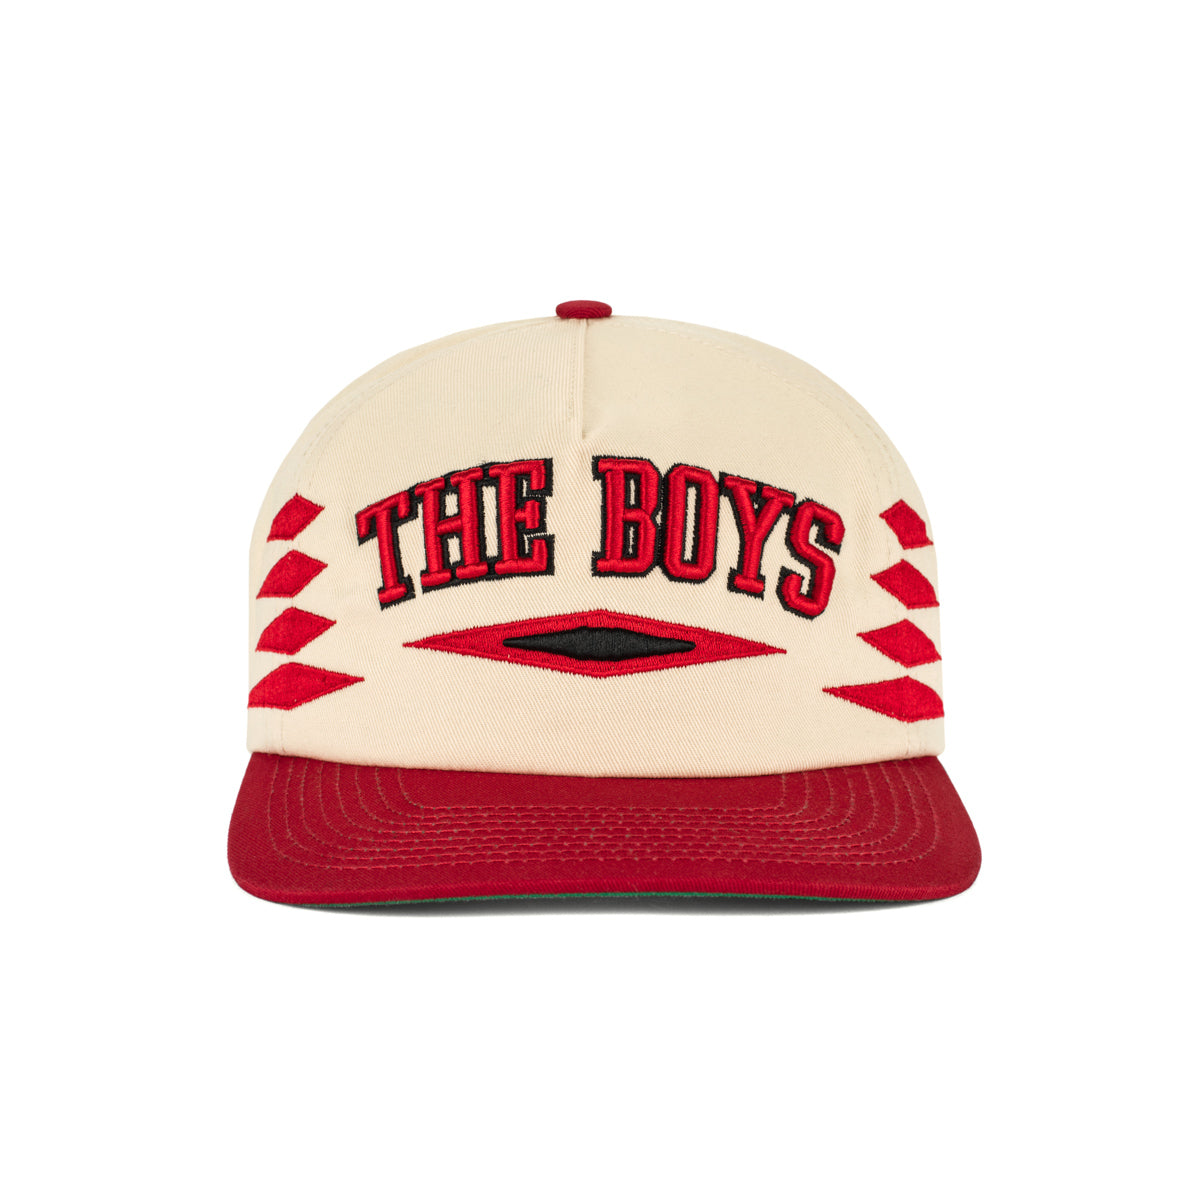 The Boys Diamond Retro Hat-Hats-Bussin With The Boys-Tan/Red-OS-Barstool Sports